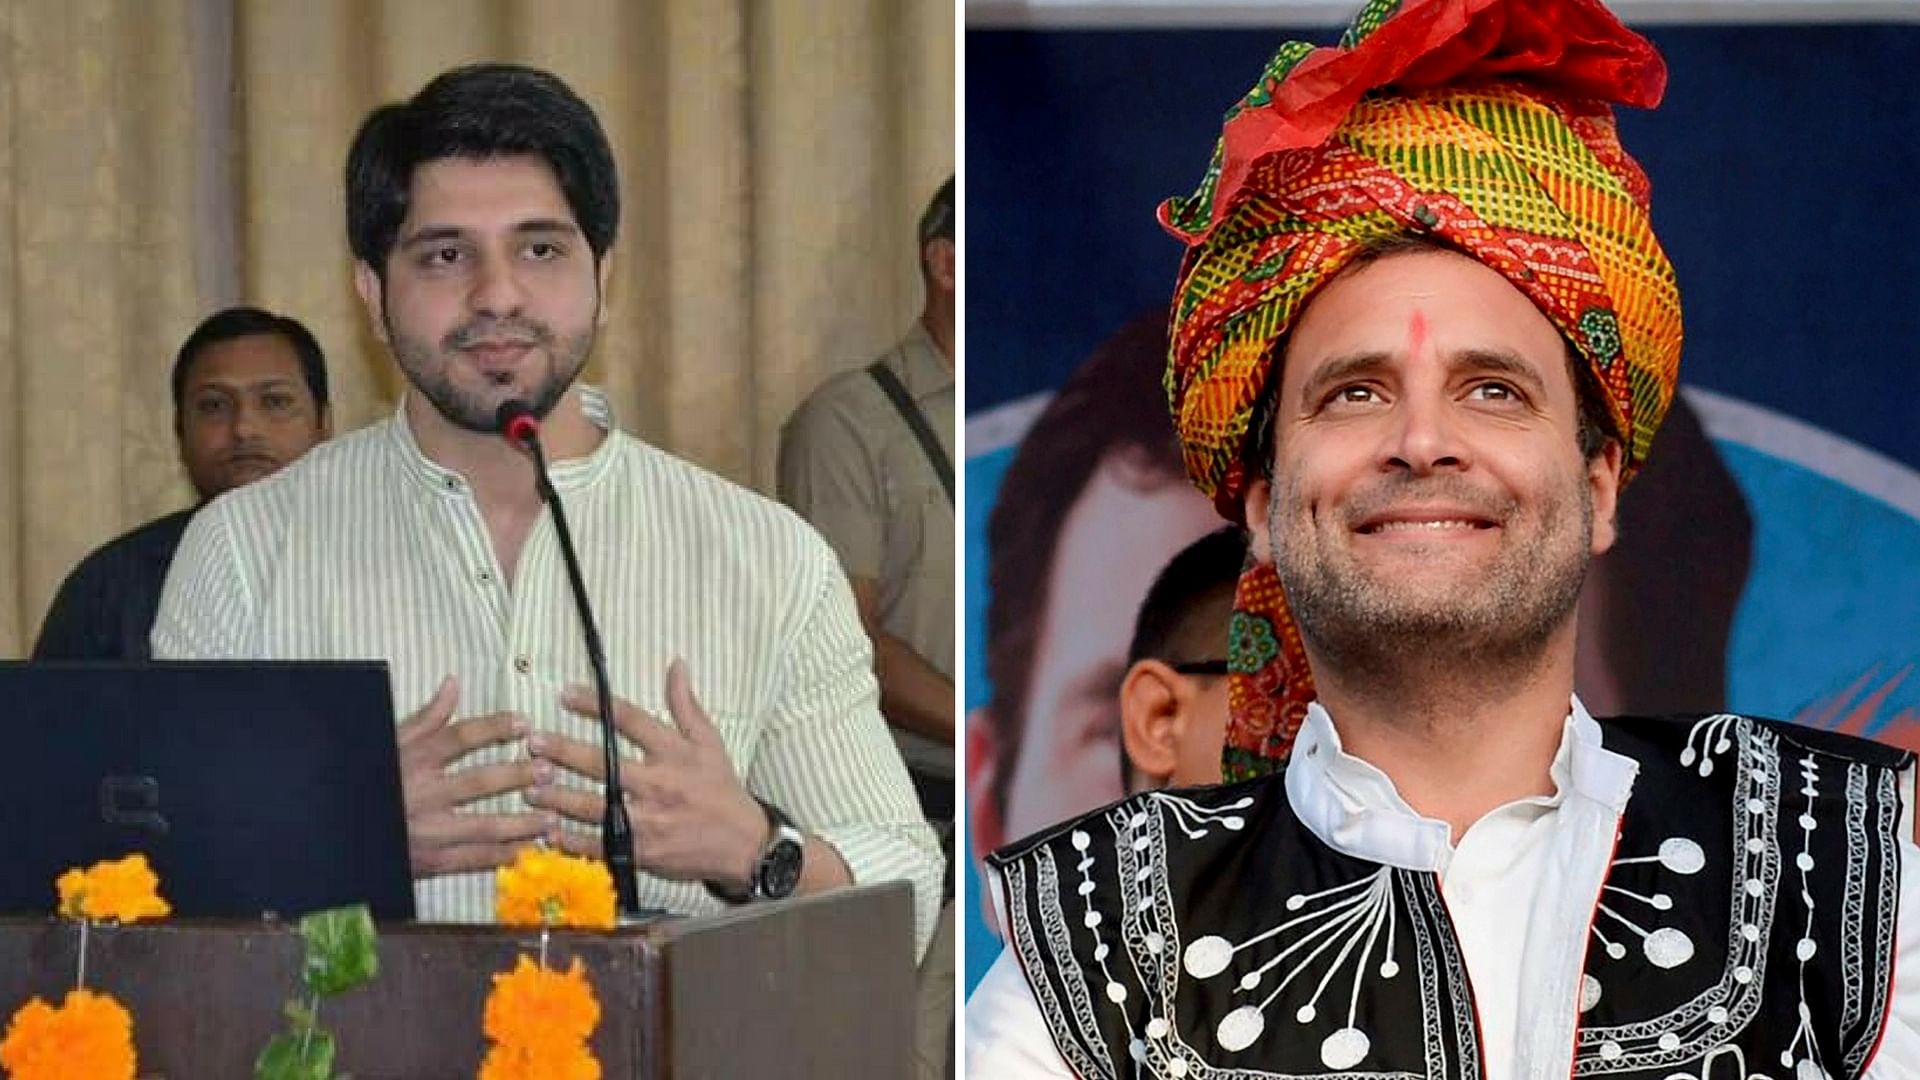 Shehzad also asked Rahul to contest the poll based on merit rather than his surname, taking a dig at dynast politics.&nbsp;